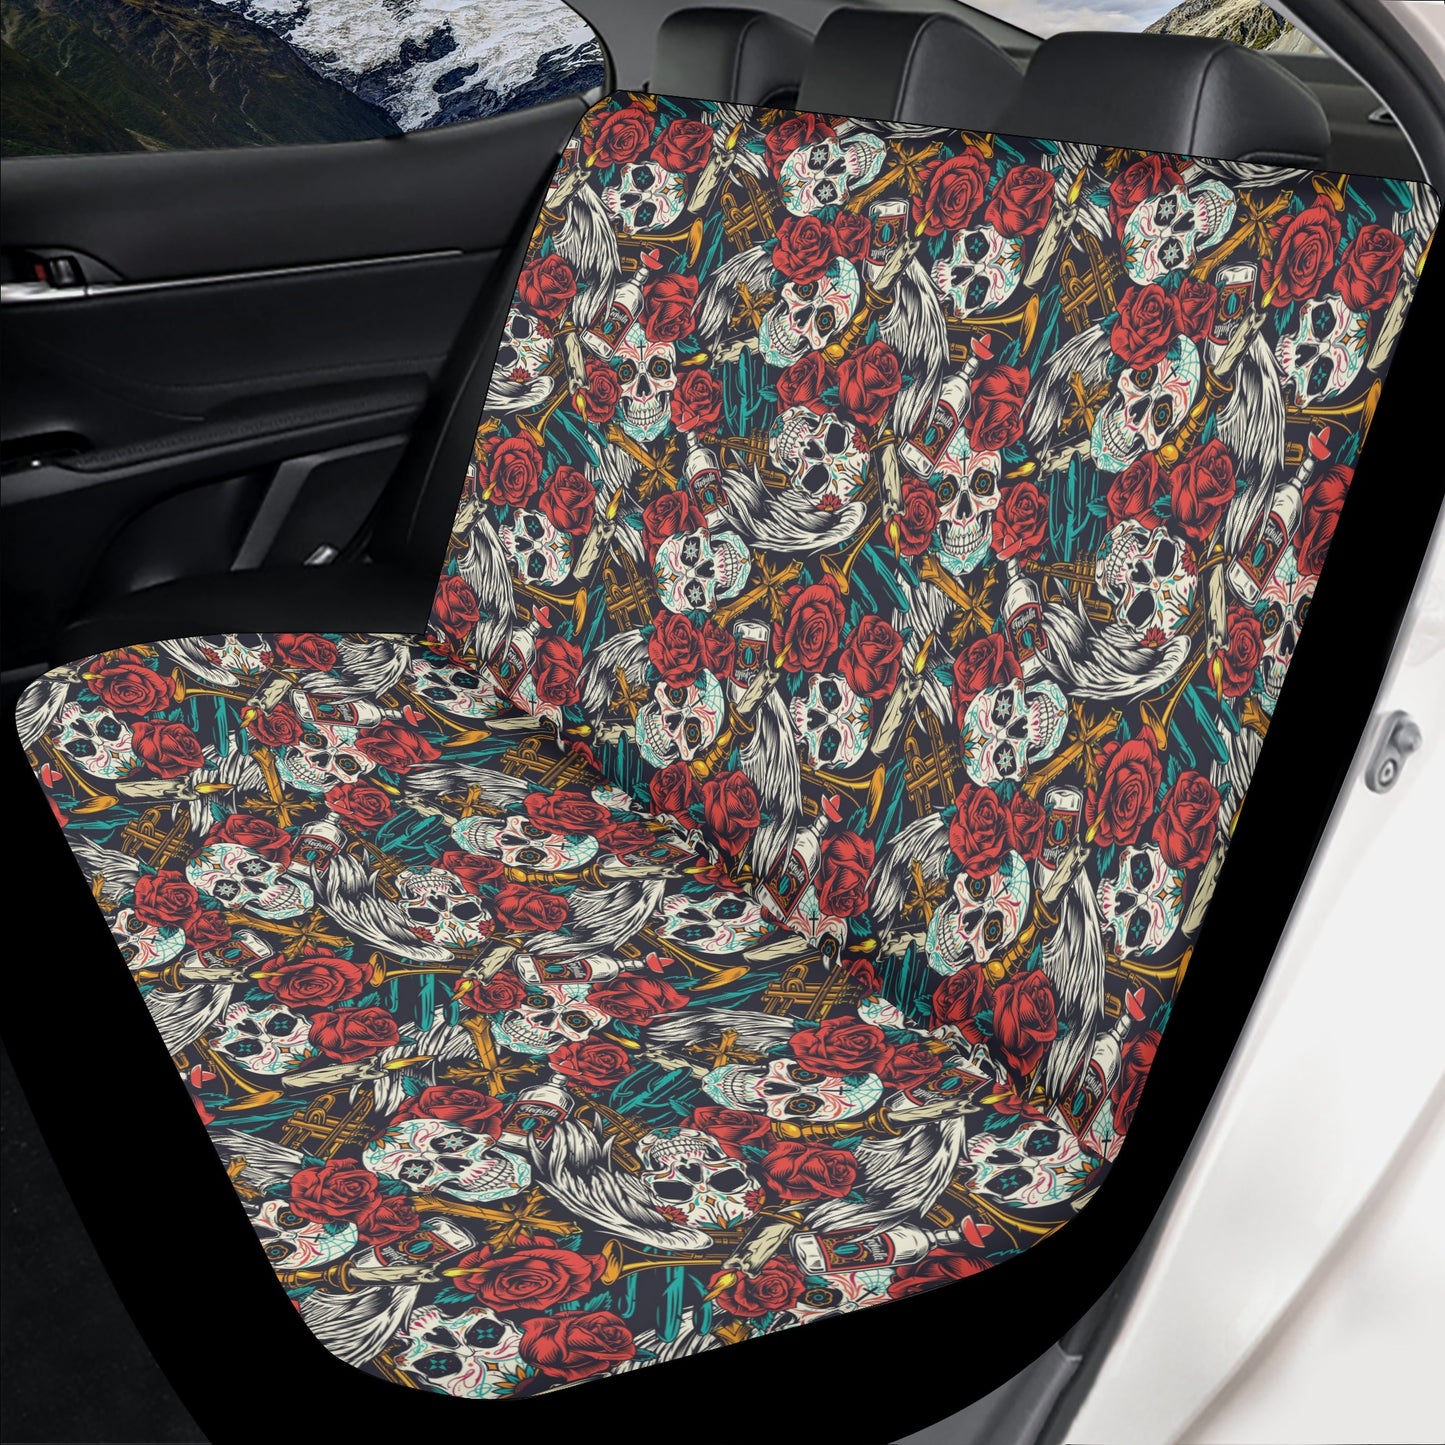 Skull in fire front and back car seat covers, goth mat for car, biker skull car rug, halloween seat cover for car, halloween car accessories